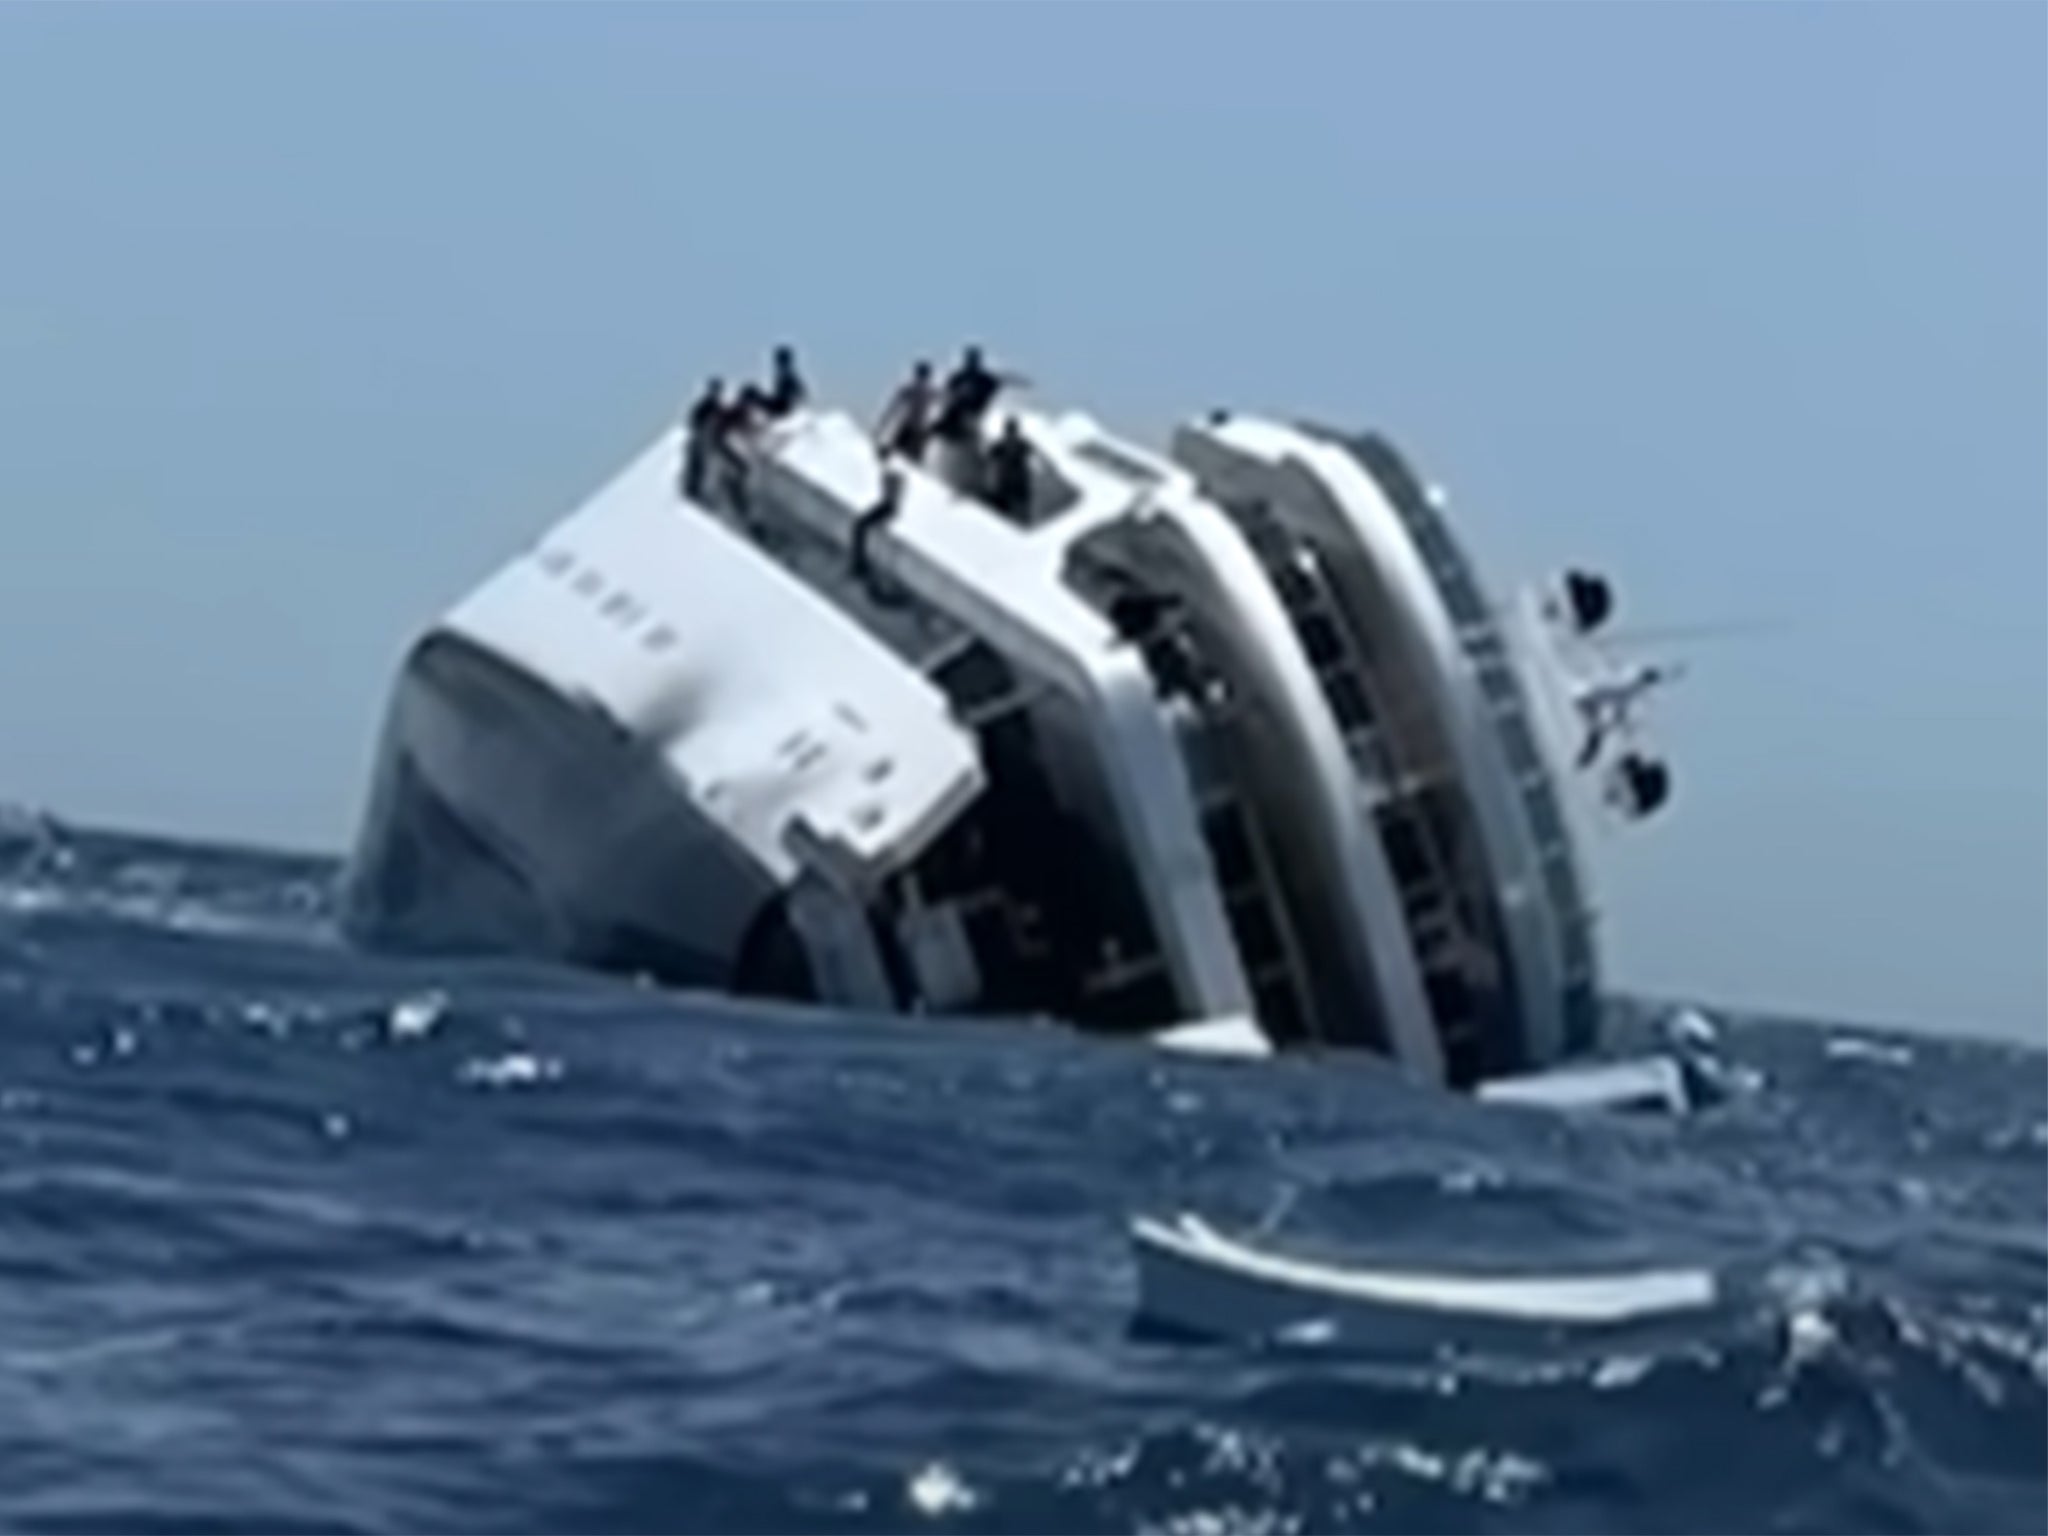 A yacht carrying 26 divers capsized in the Red Sea last month